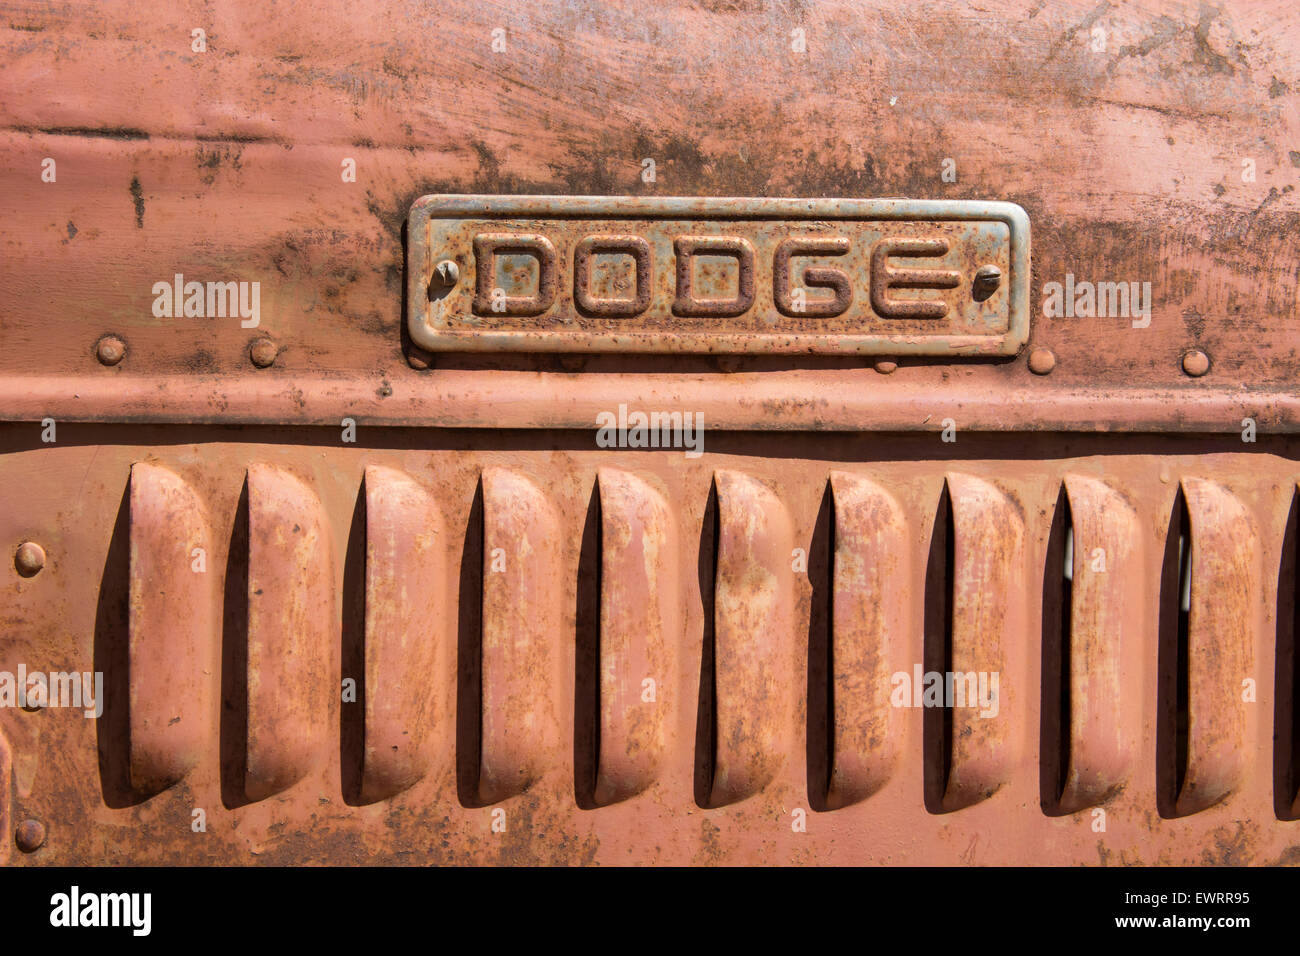 Australia, NT, Alice Springs. National Road Transport Hall of Fame. Old rusty vintage Dodge truck hood. Stock Photo